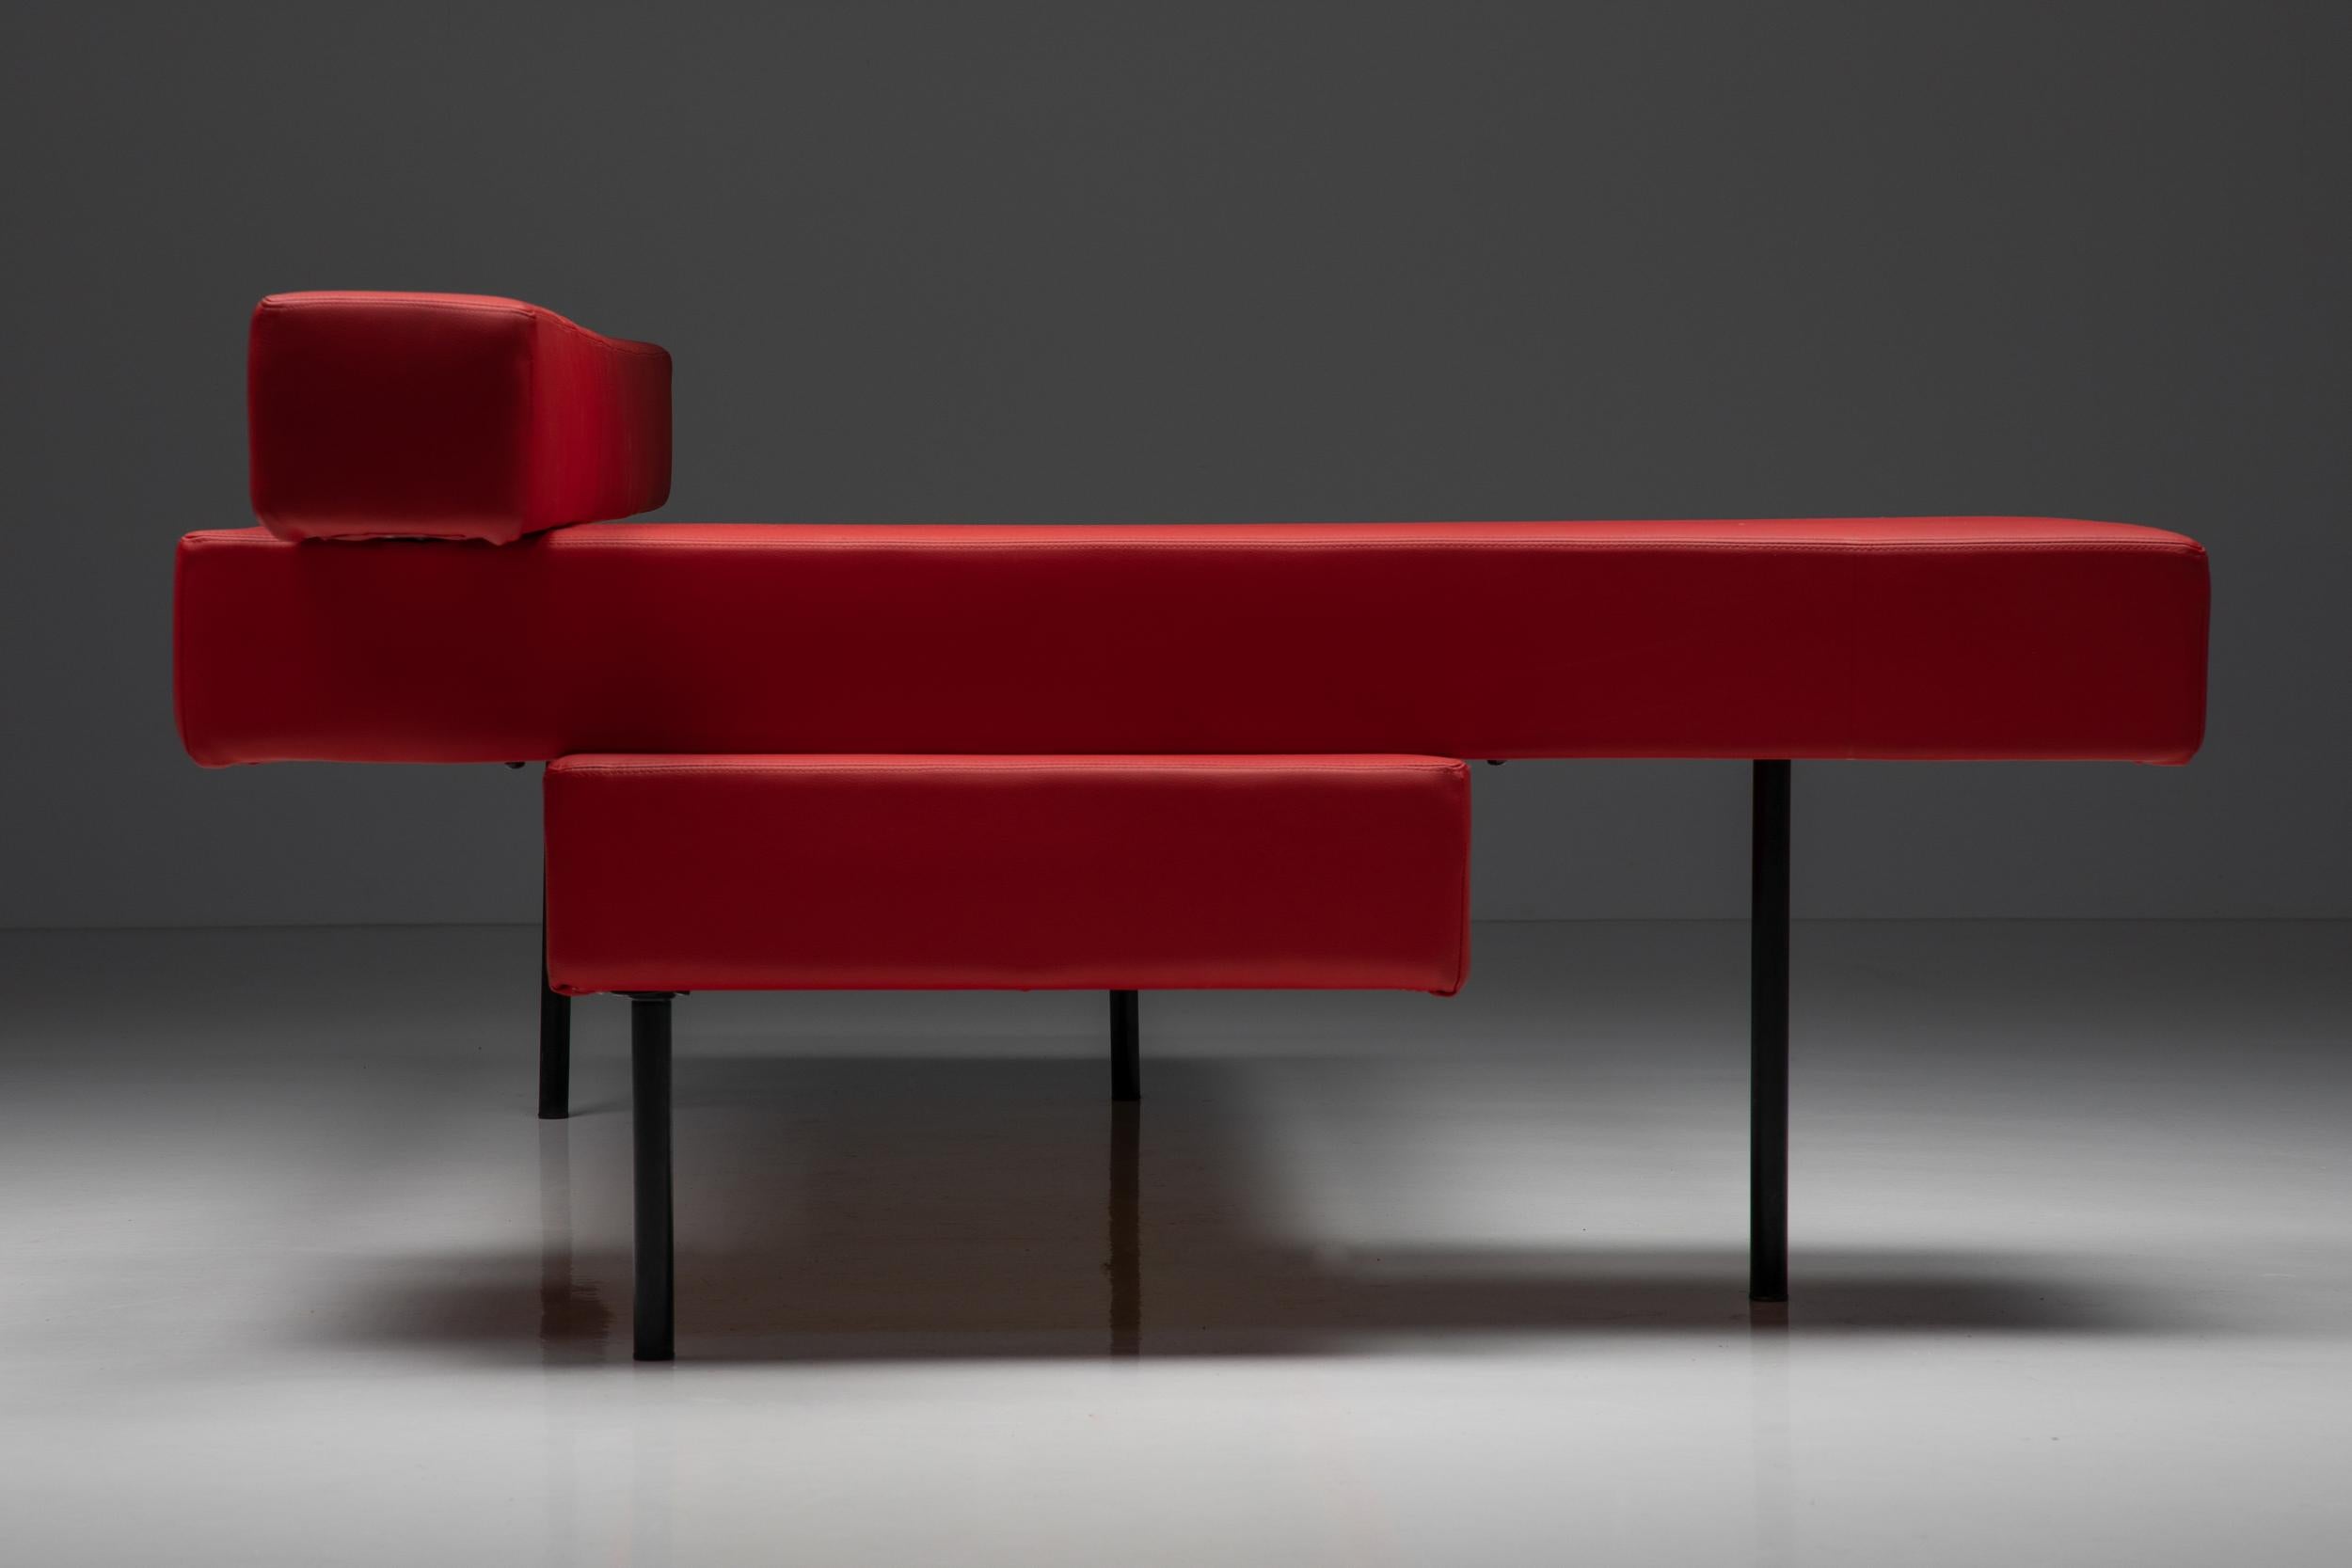 Postmodern Rectangular Red Architectural Sofa, Belgian Design, Prototype, 2000's In Excellent Condition For Sale In Antwerp, BE